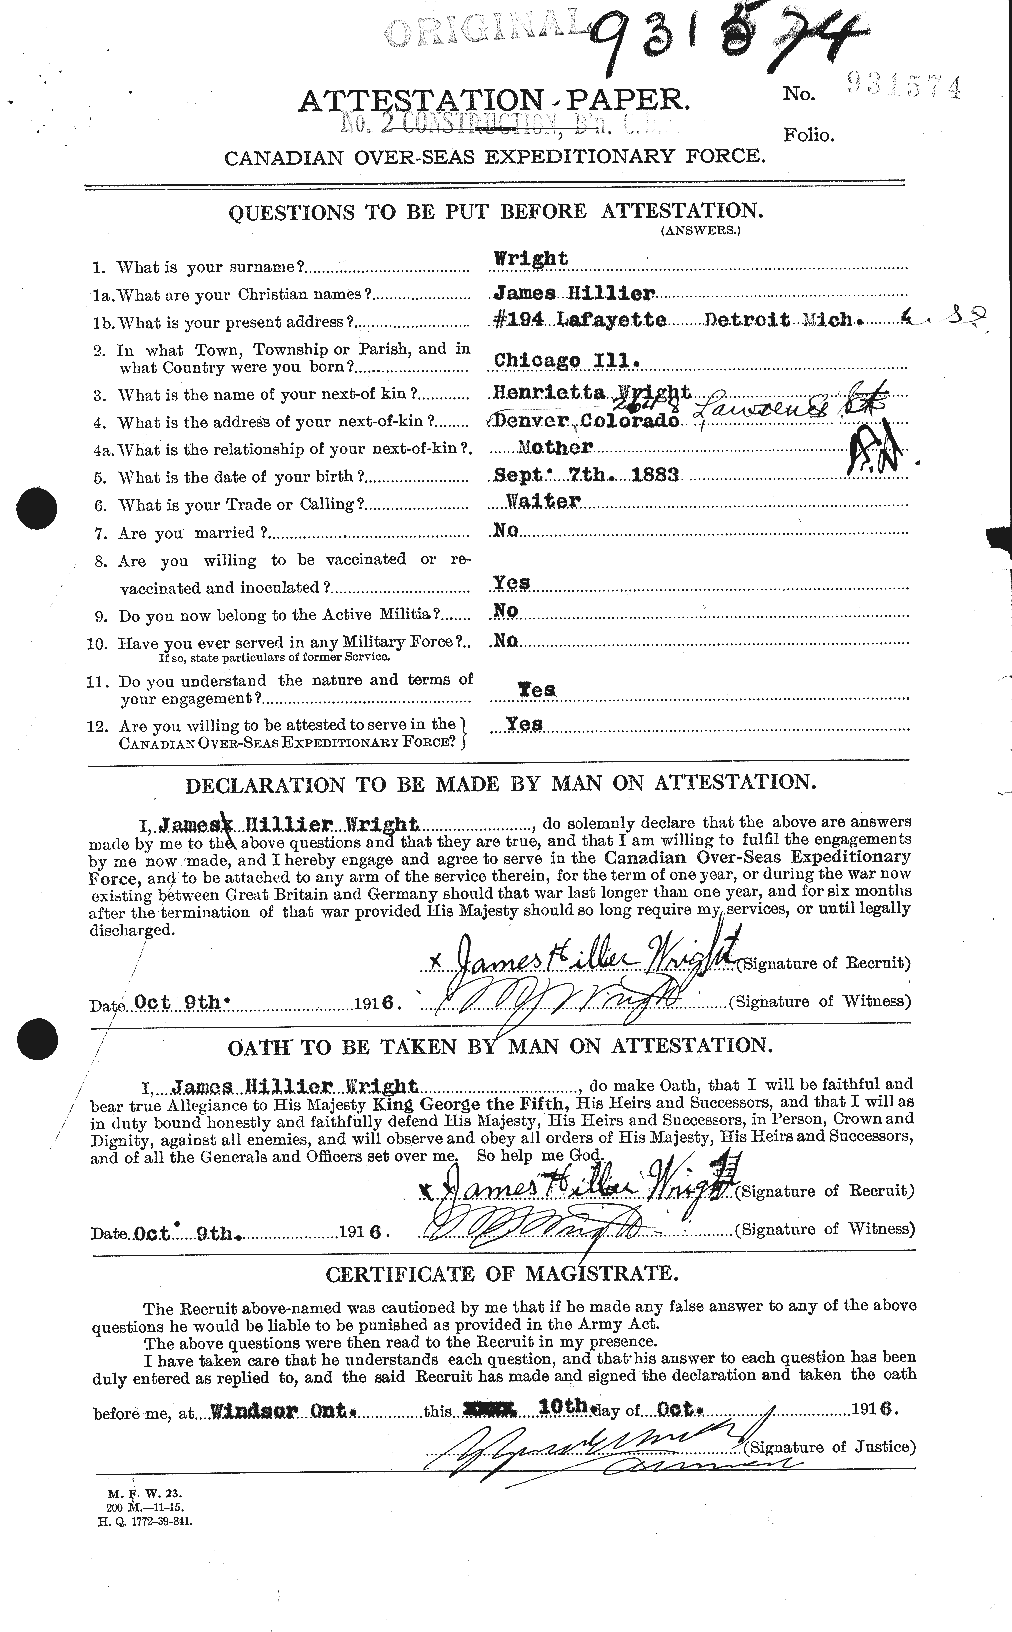 Personnel Records of the First World War - CEF 687026a